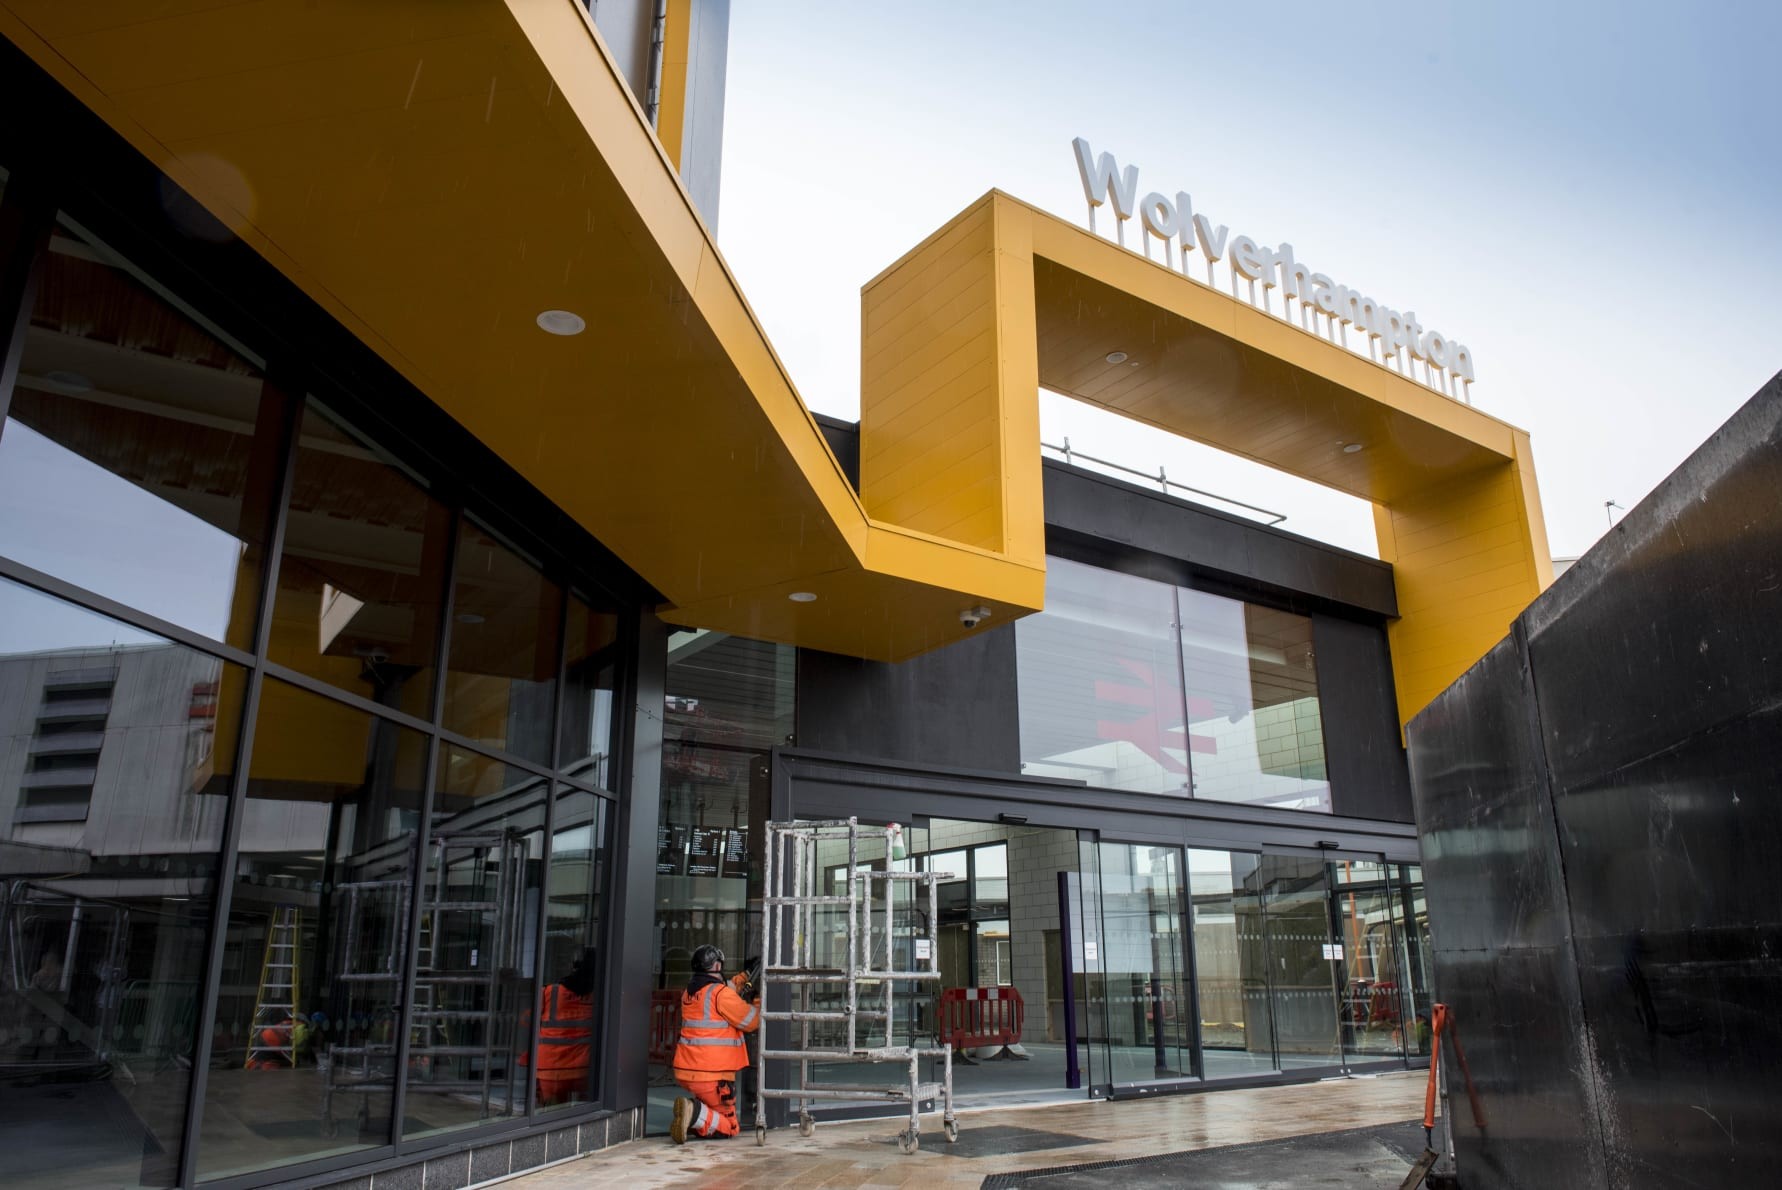 Phase One of new Wolverhampton Station opens to public